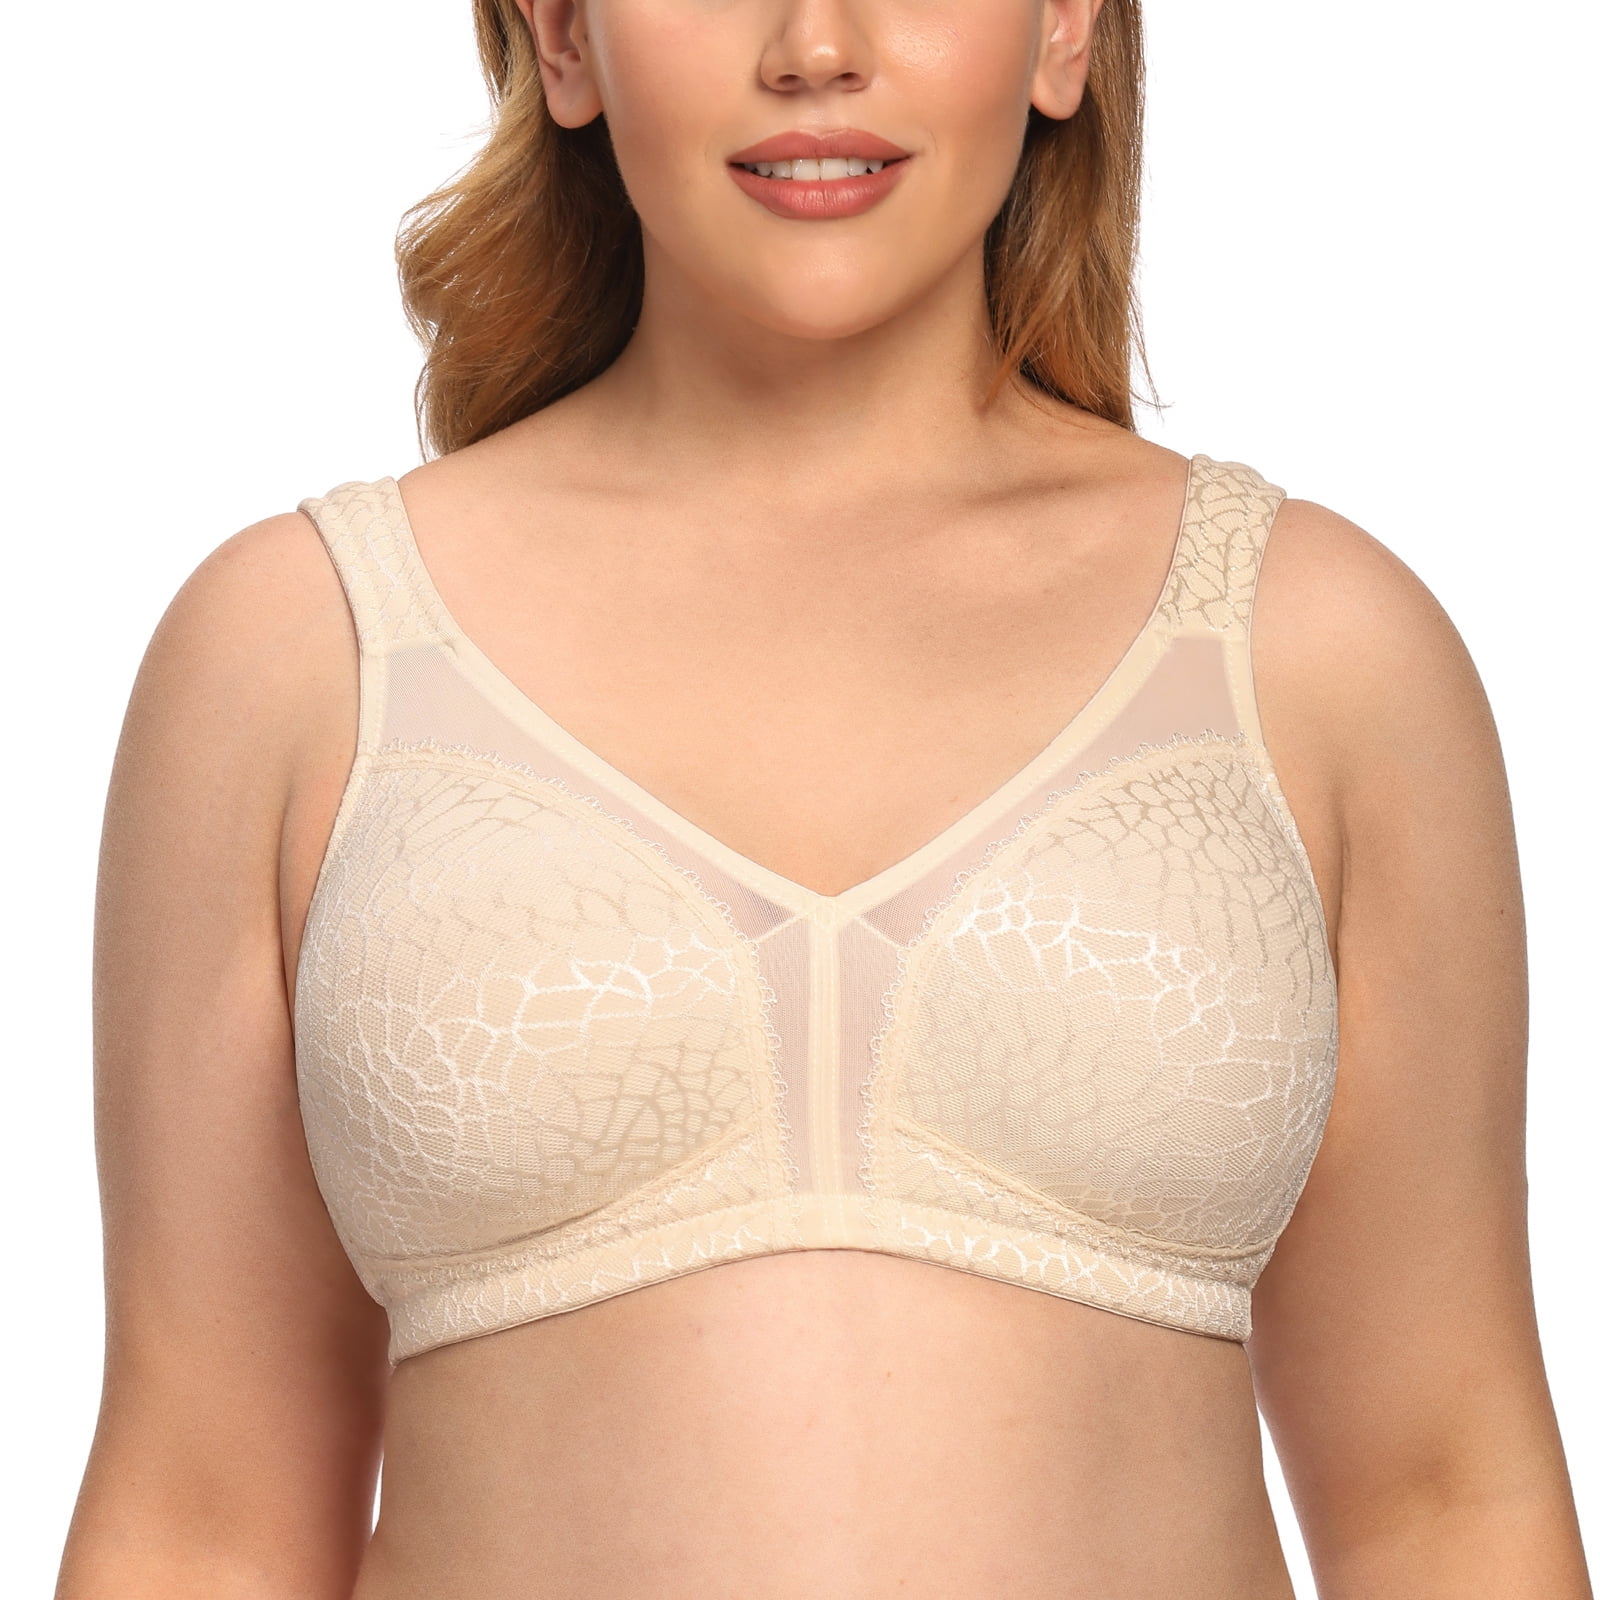 Exclare Women's Comfort Full Coverage Double Support Unpadded